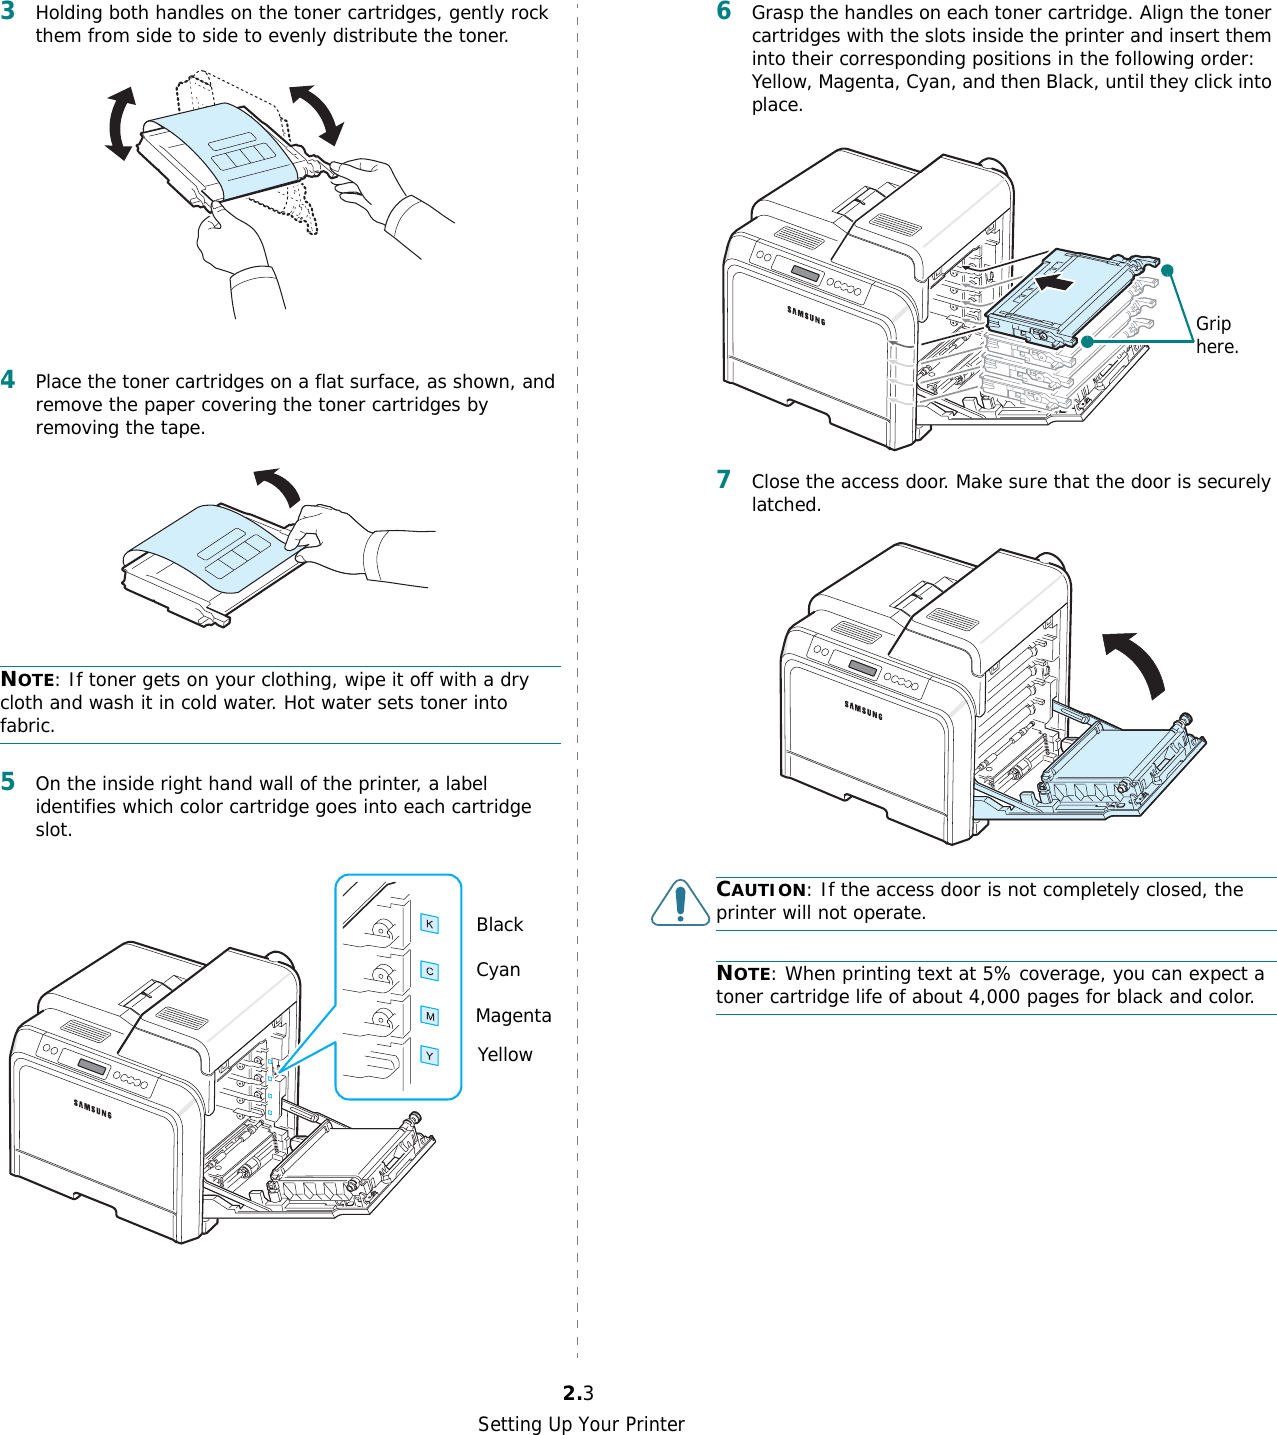 Setting Up Your Printer2.33Holding both handles on the toner cartridges, gently rock them from side to side to evenly distribute the toner.4Place the toner cartridges on a flat surface, as shown, and remove the paper covering the toner cartridges by removing the tape.NOTE: If toner gets on your clothing, wipe it off with a dry cloth and wash it in cold water. Hot water sets toner into fabric.5On the inside right hand wall of the printer, a label identifies which color cartridge goes into each cartridge slot.BlackYellowMagentaCyan6Grasp the handles on each toner cartridge. Align the toner cartridges with the slots inside the printer and insert them into their corresponding positions in the following order: Yellow, Magenta, Cyan, and then Black, until they click into place.7Close the access door. Make sure that the door is securely latched.CAUTION: If the access door is not completely closed, the printer will not operate.NOTE: When printing text at 5% coverage, you can expect a toner cartridge life of about 4,000 pages for black and color.Grip here.